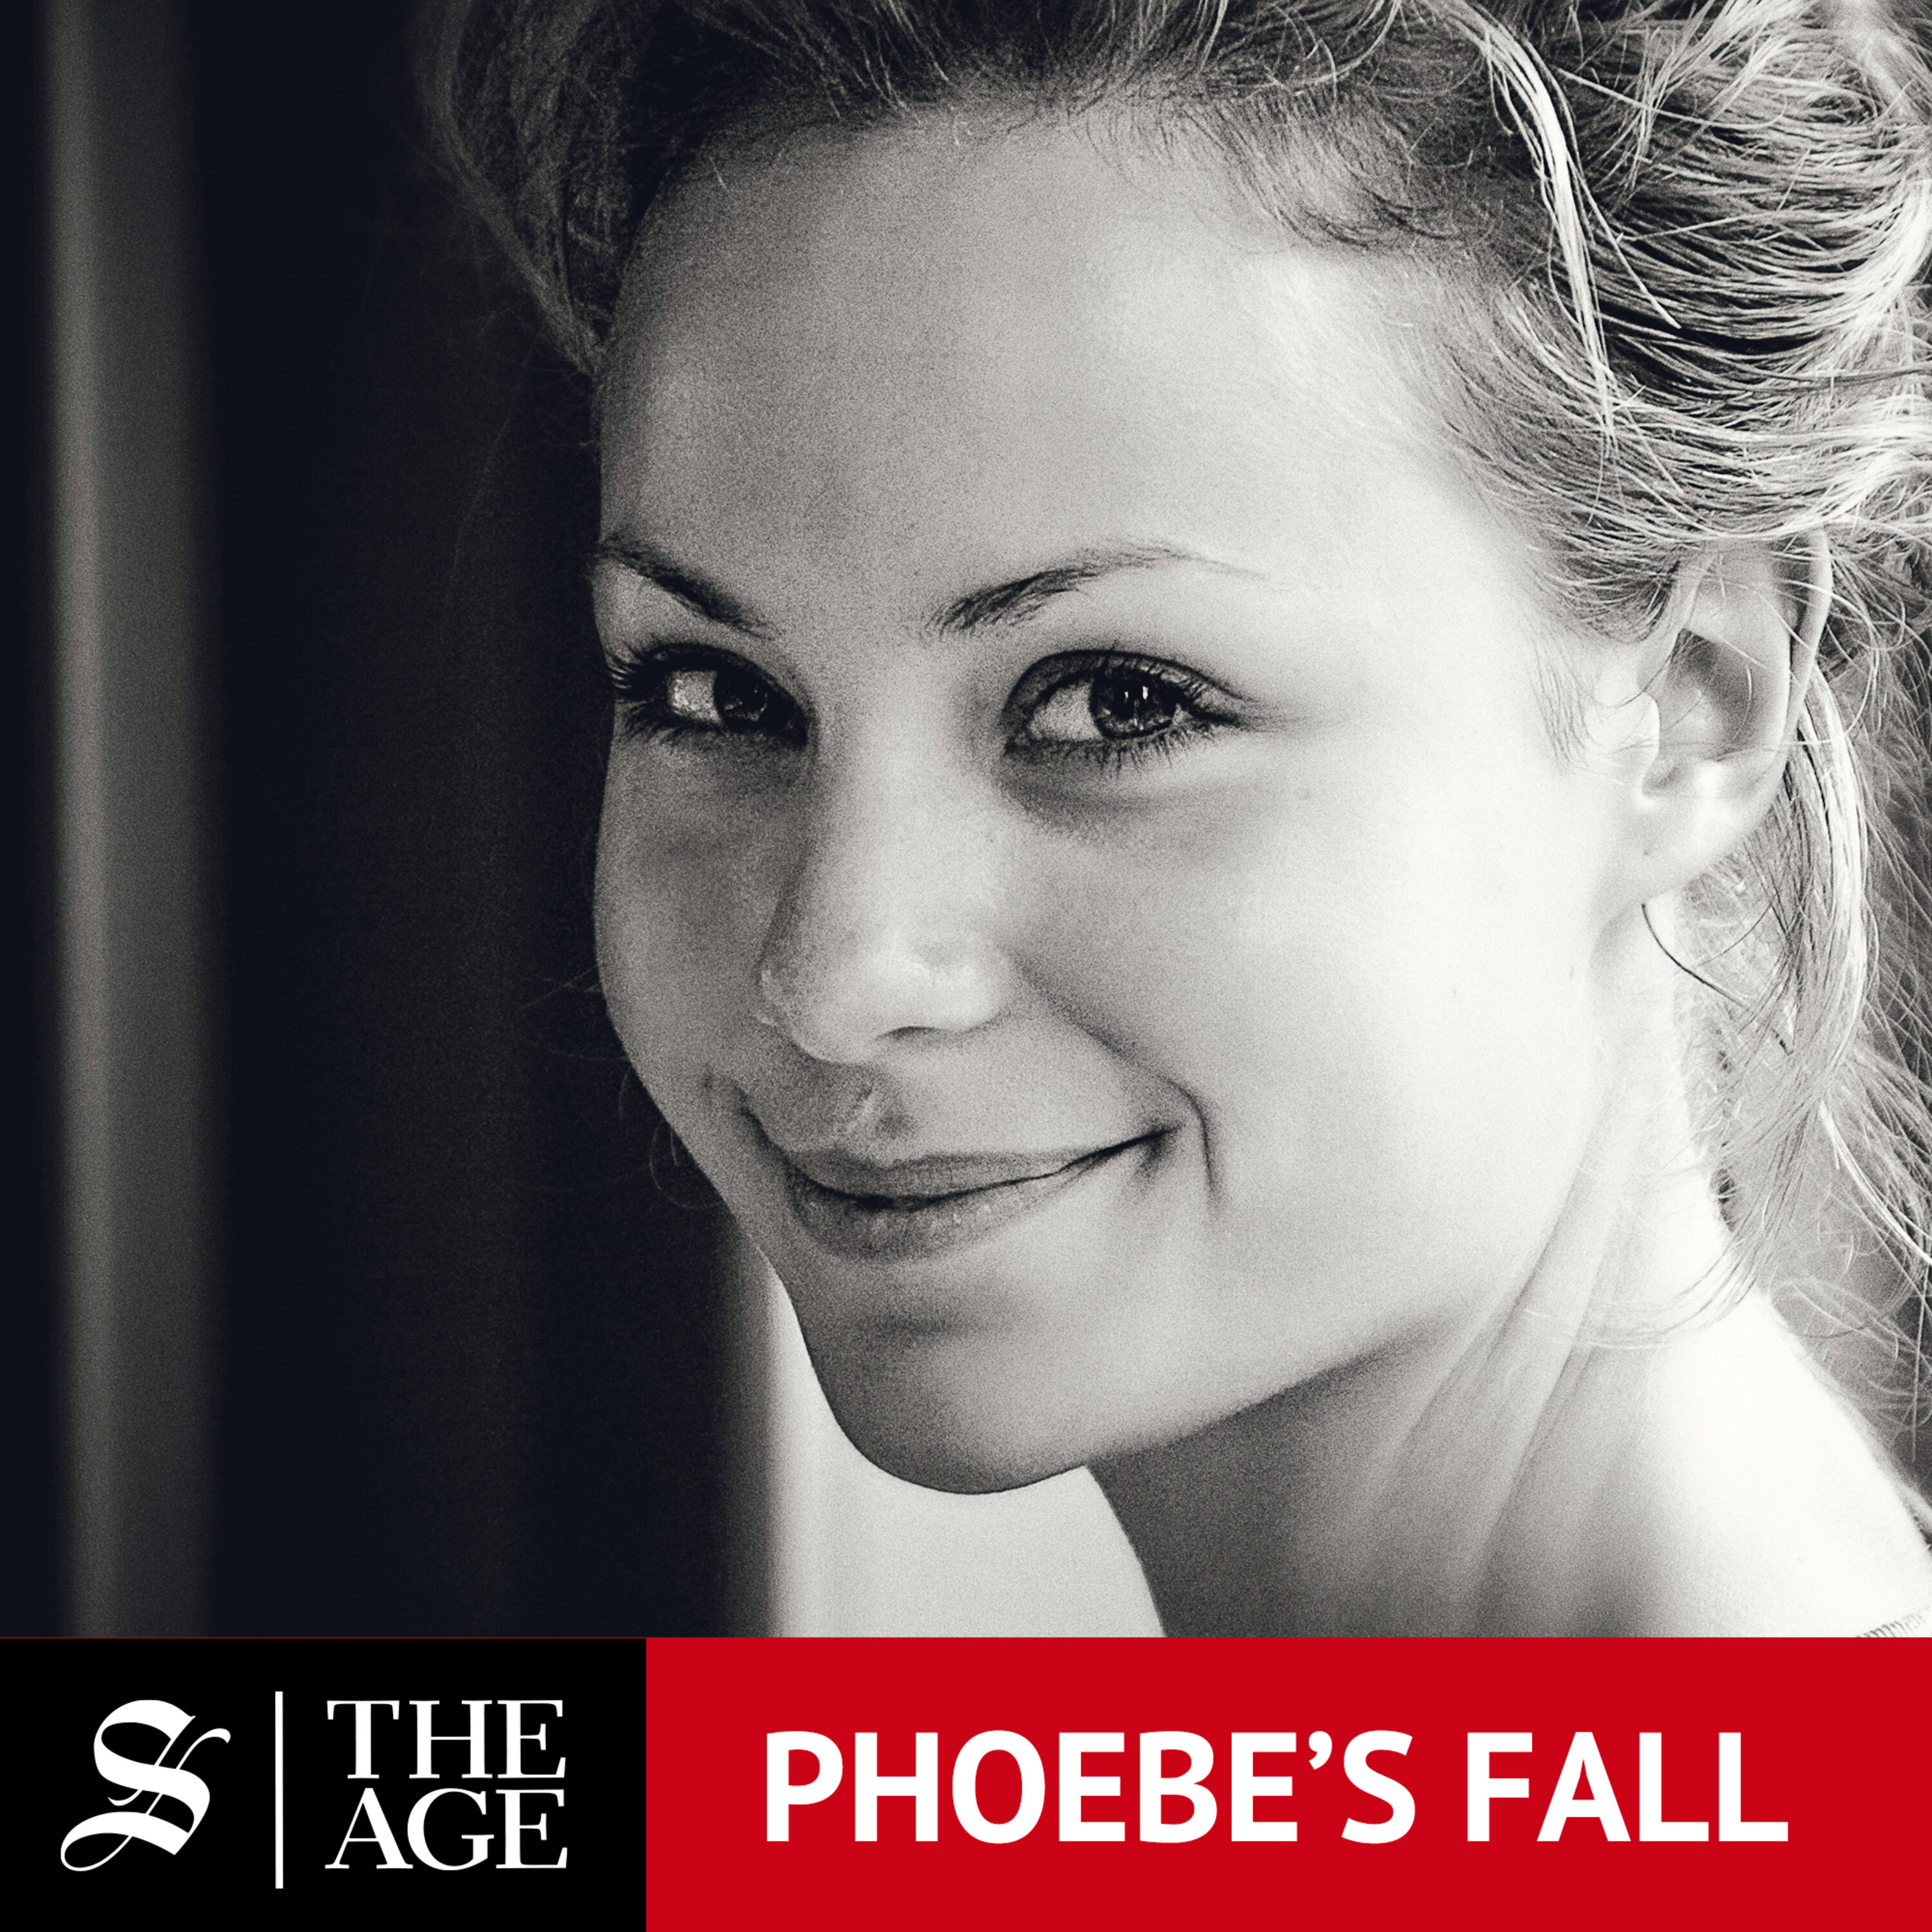 Phoebe's Fall:The Age and Sydney Morning Herald